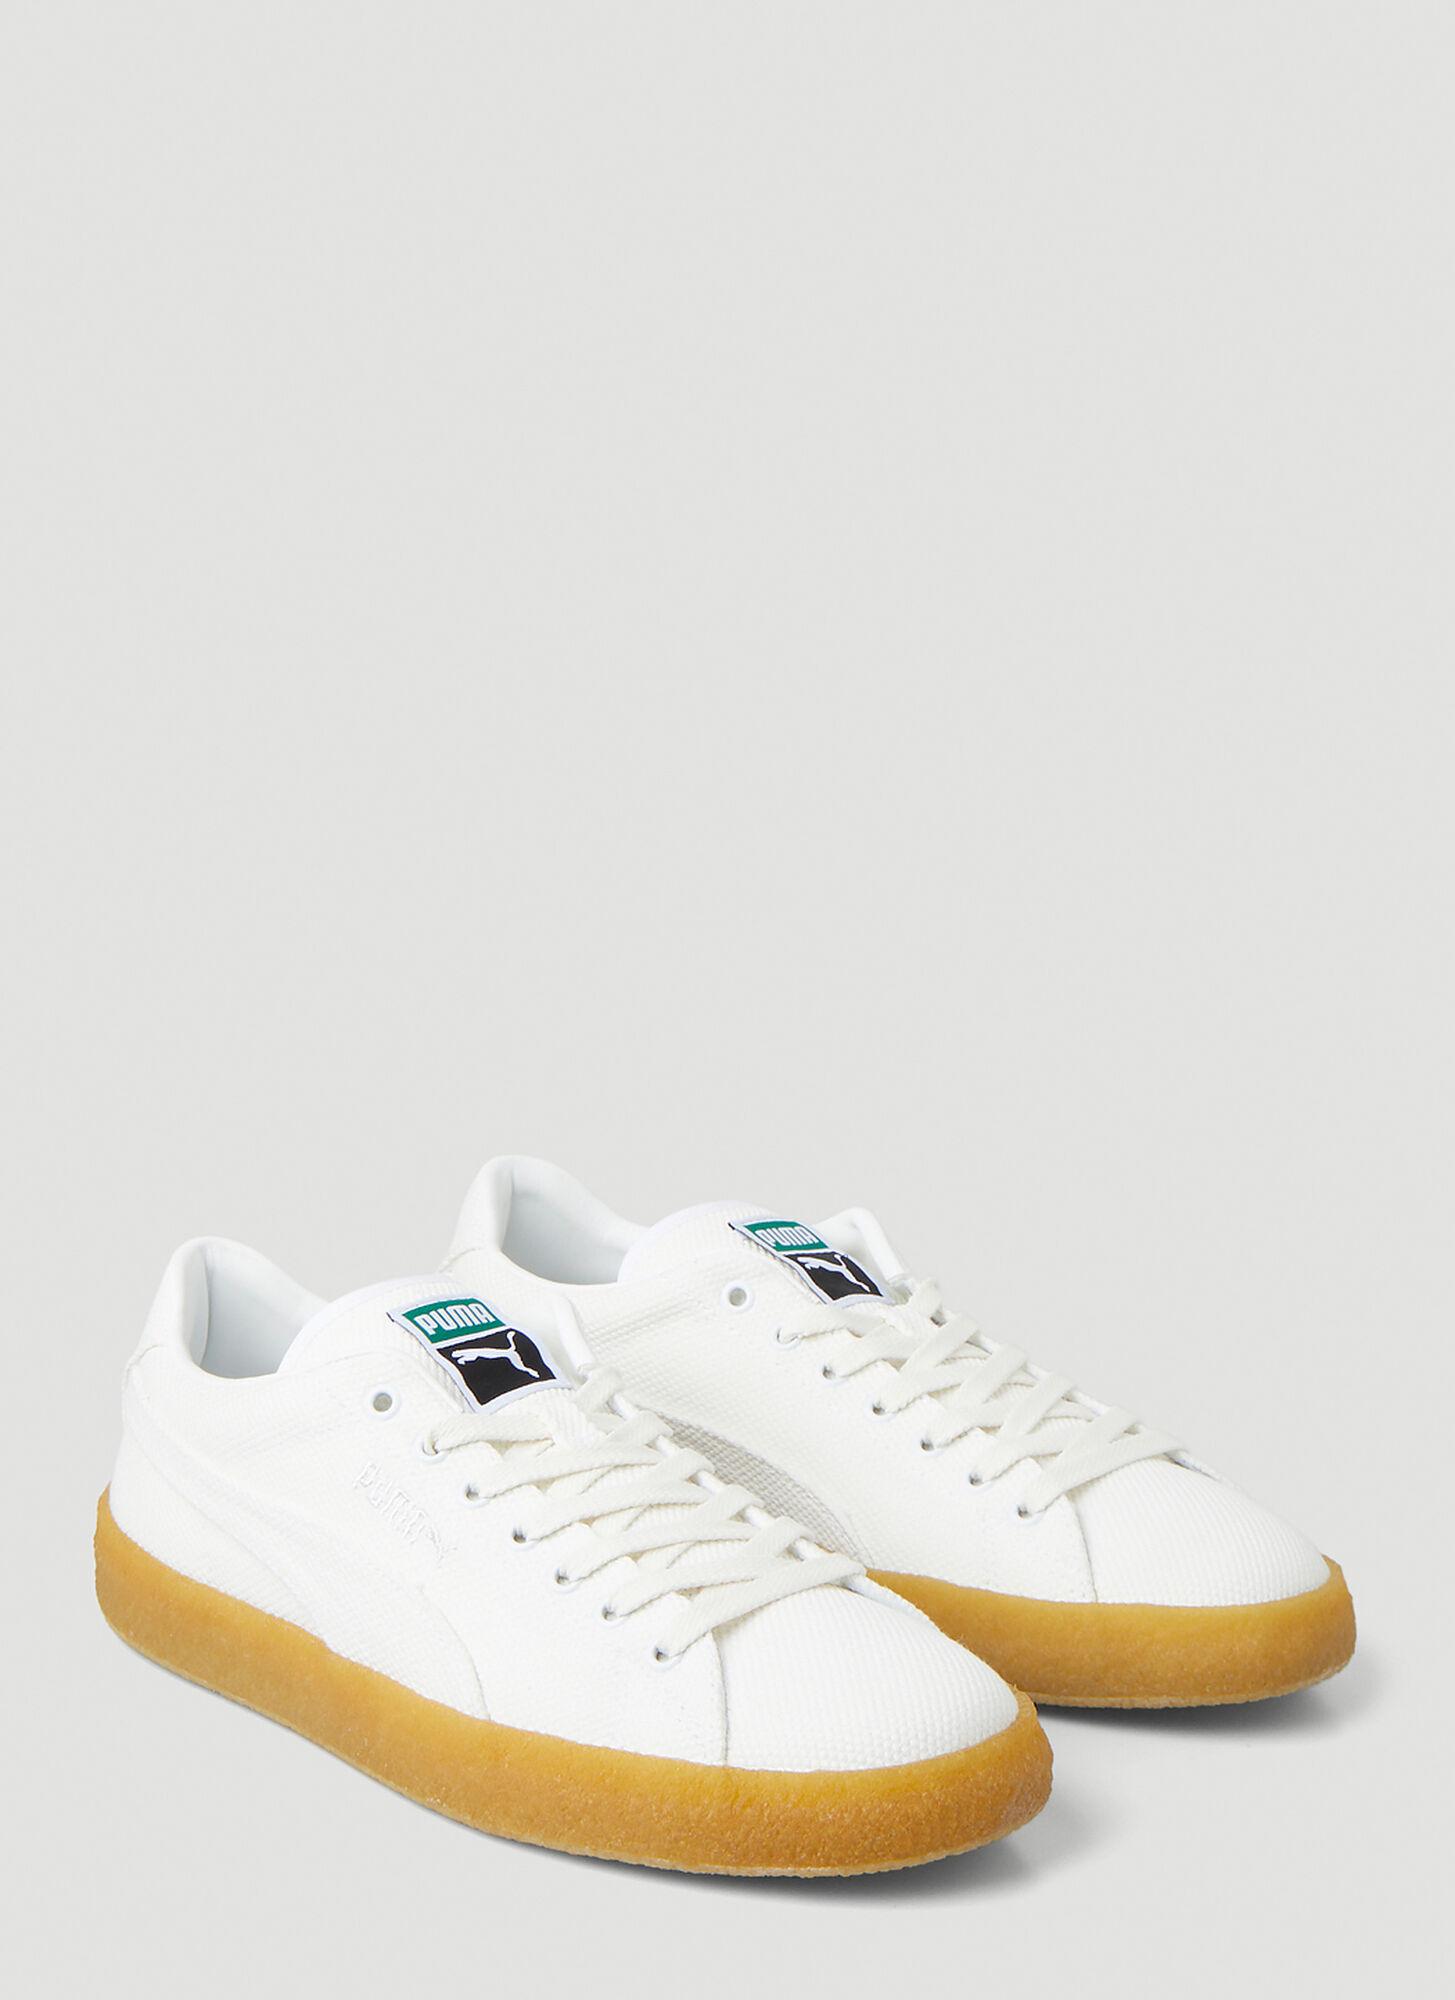 PUMA Crepe Canvas Sneakers in White for Men | Lyst